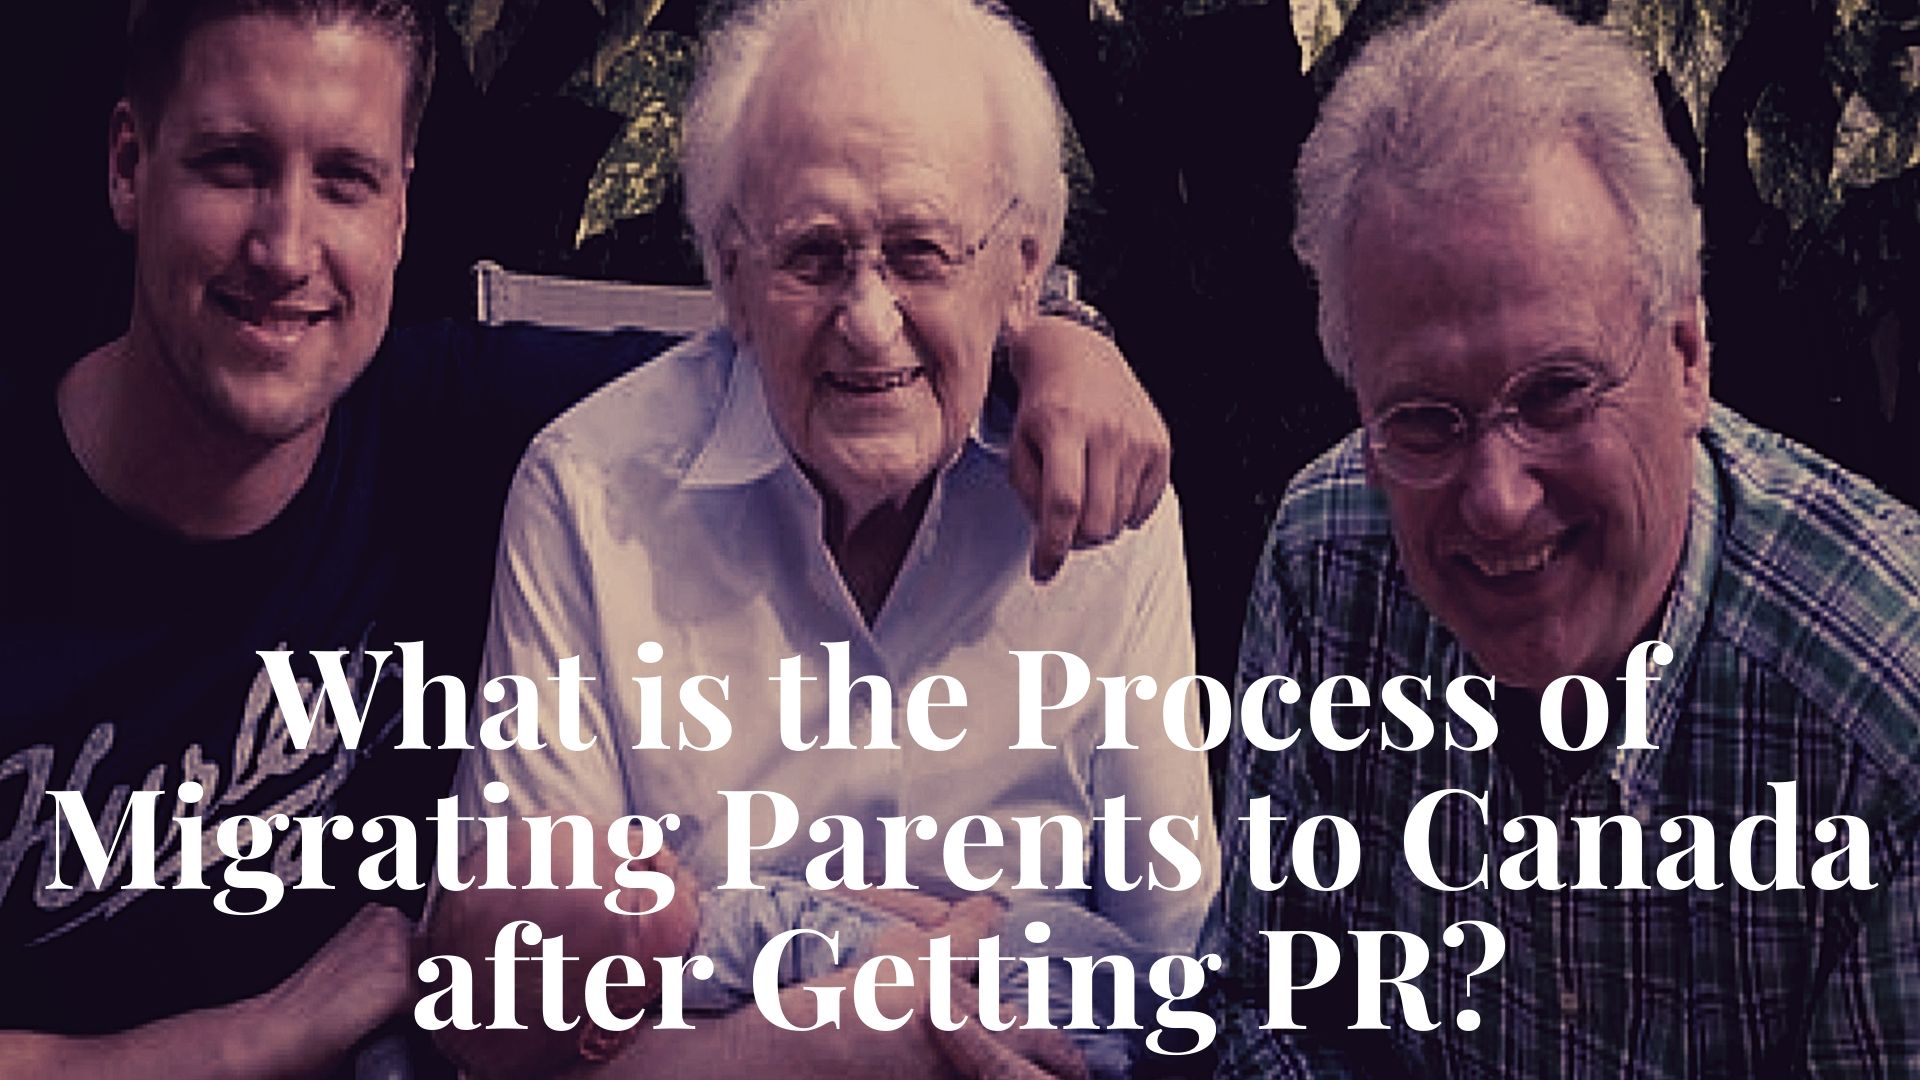 What is the Process of Migrating Parents to Canada after Getting PR